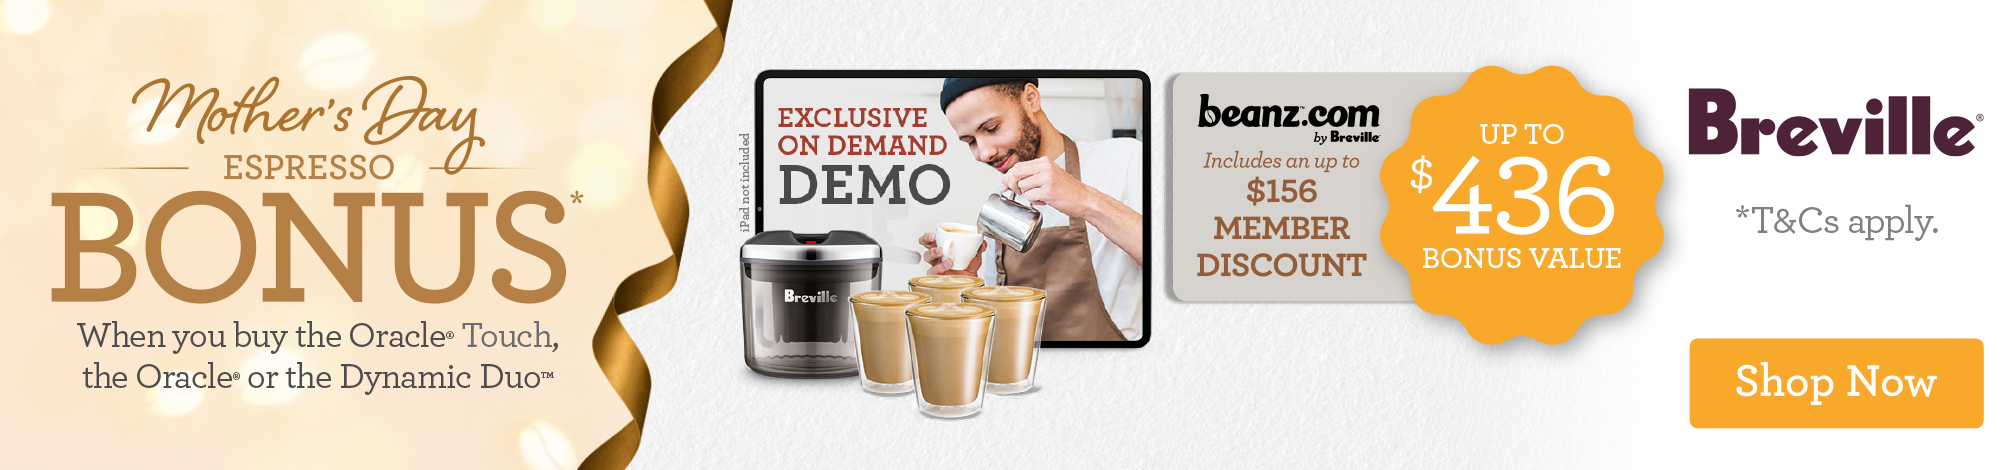 Bonus Barista Pack On Selected Breville Coffee Machines